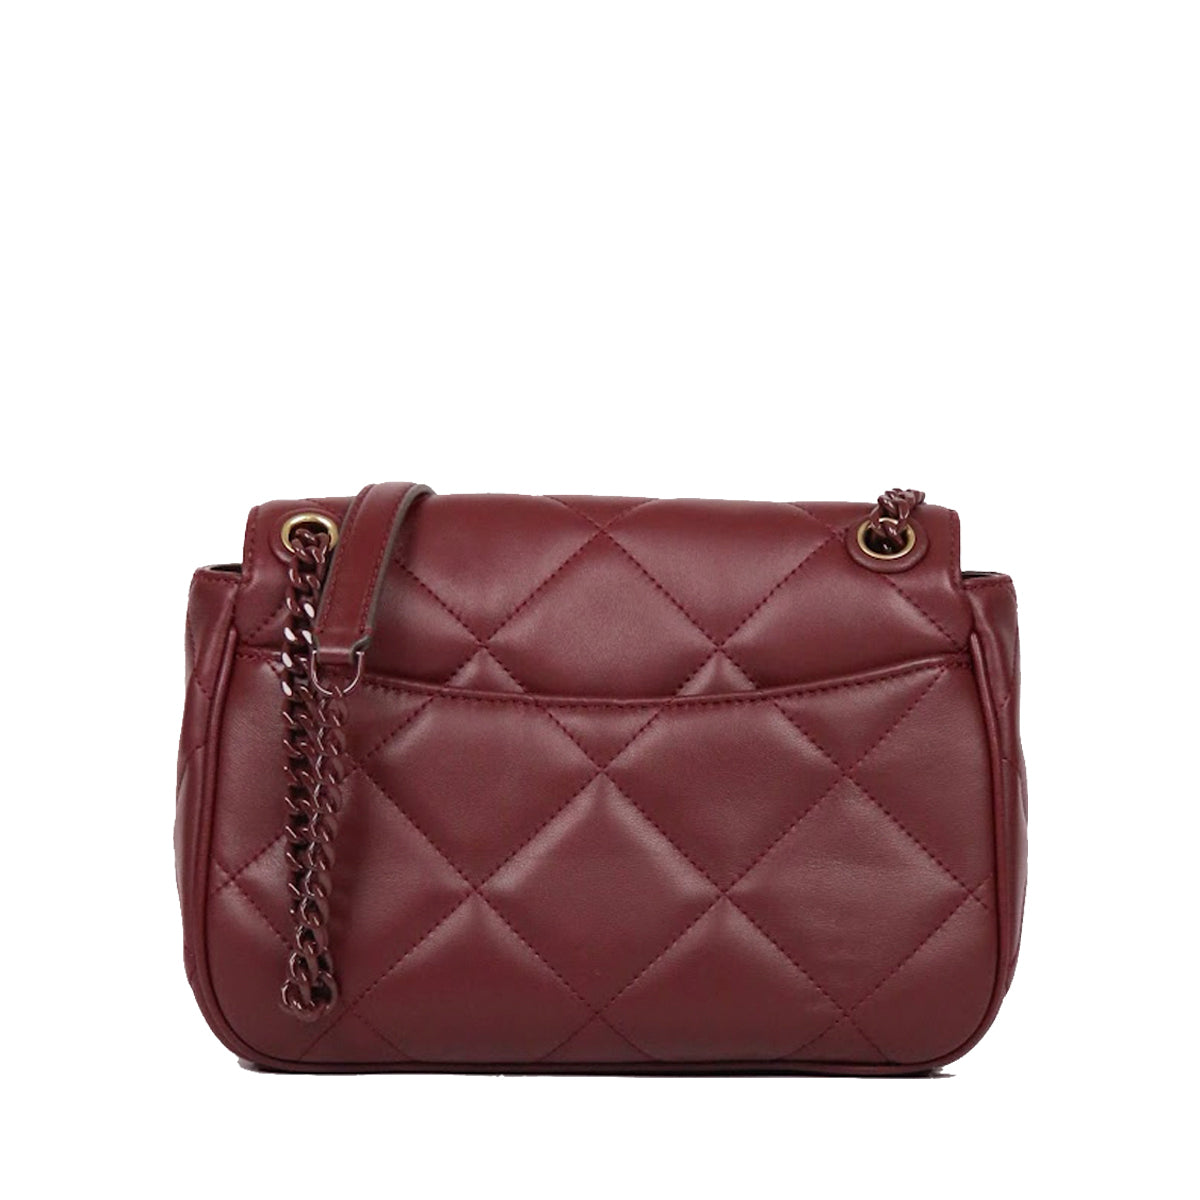 Tory Burch 139283 Willa Soft Quilt Small Shoulder Bag In Claret